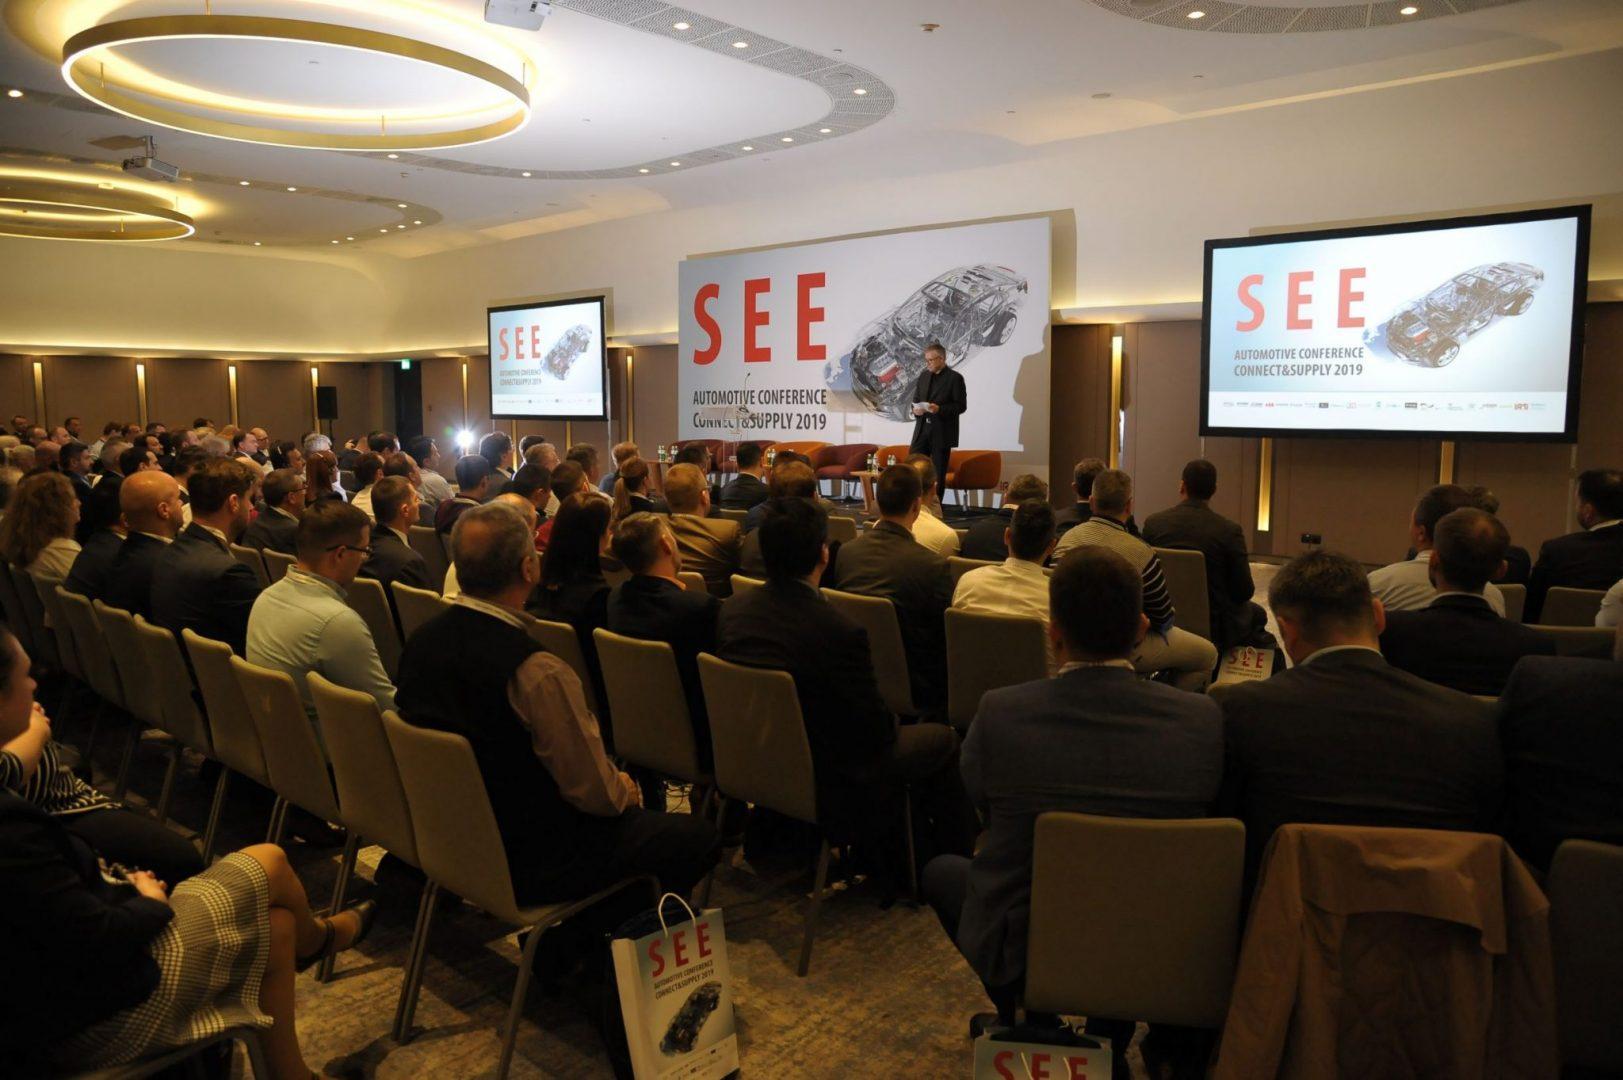 SEE Automotive – Connect & Supply online conference